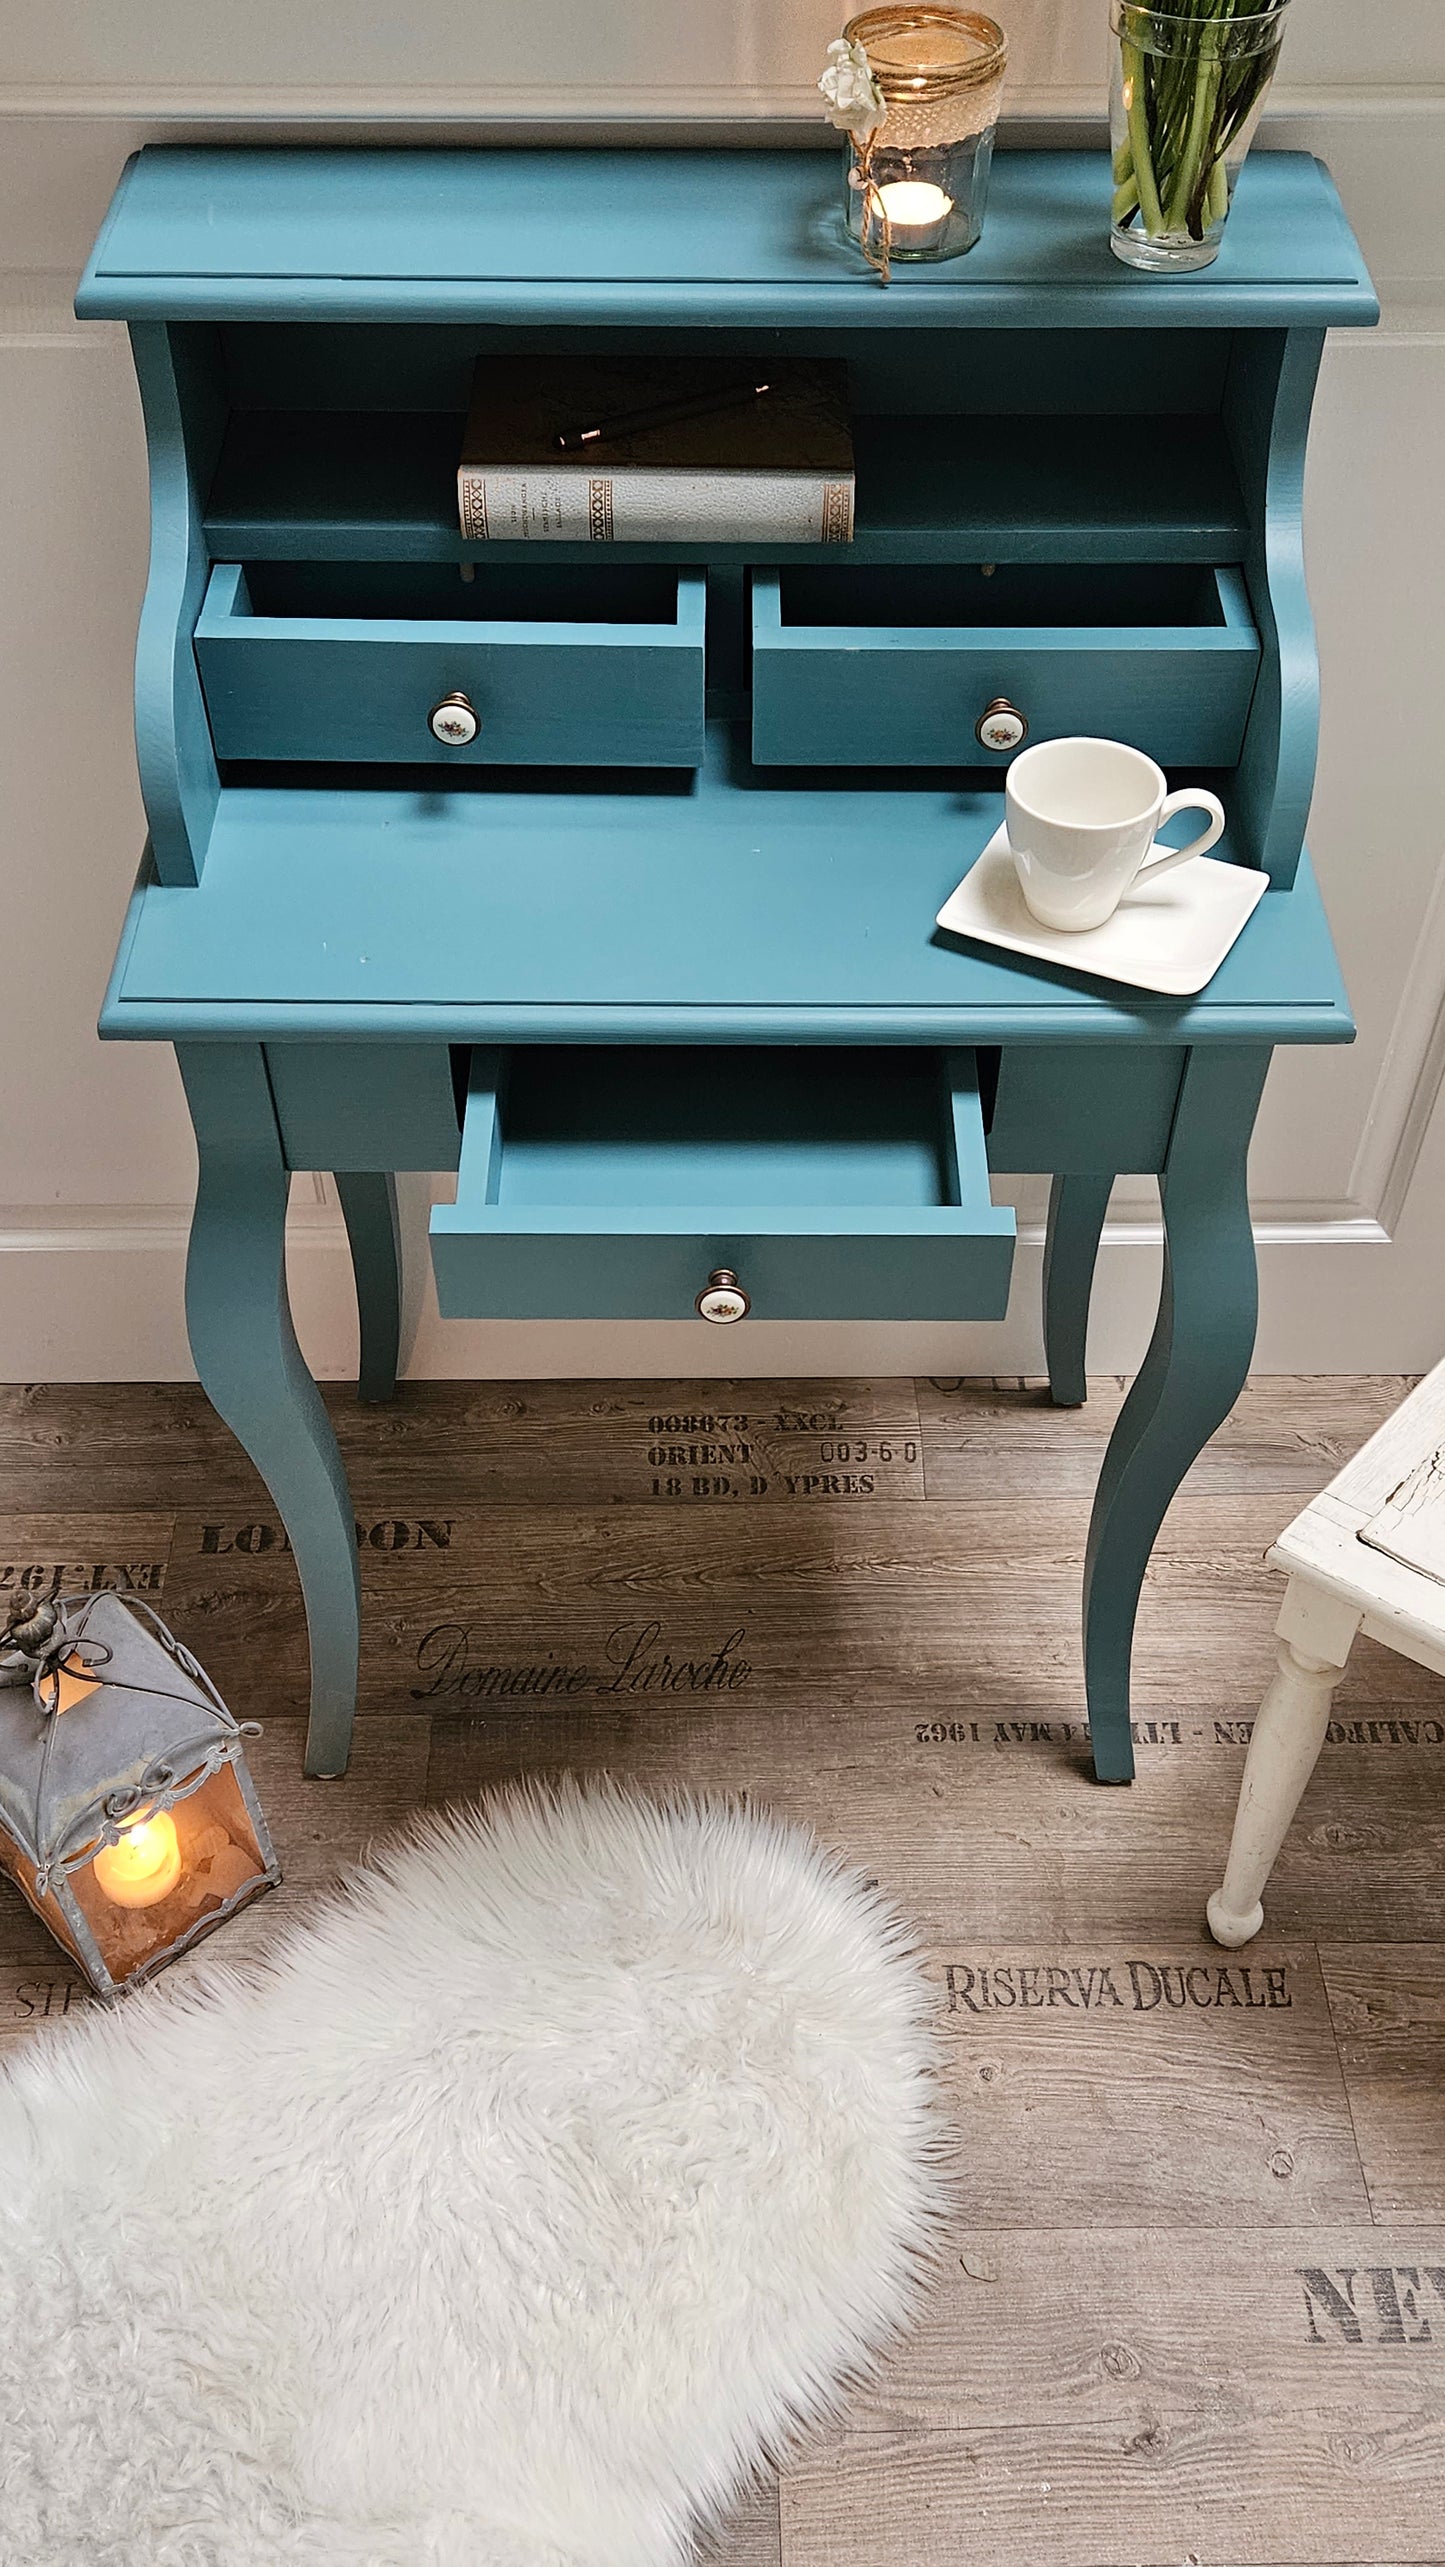 "Svejol" - Country house secretary, solid wood pastel turquoise lacquered